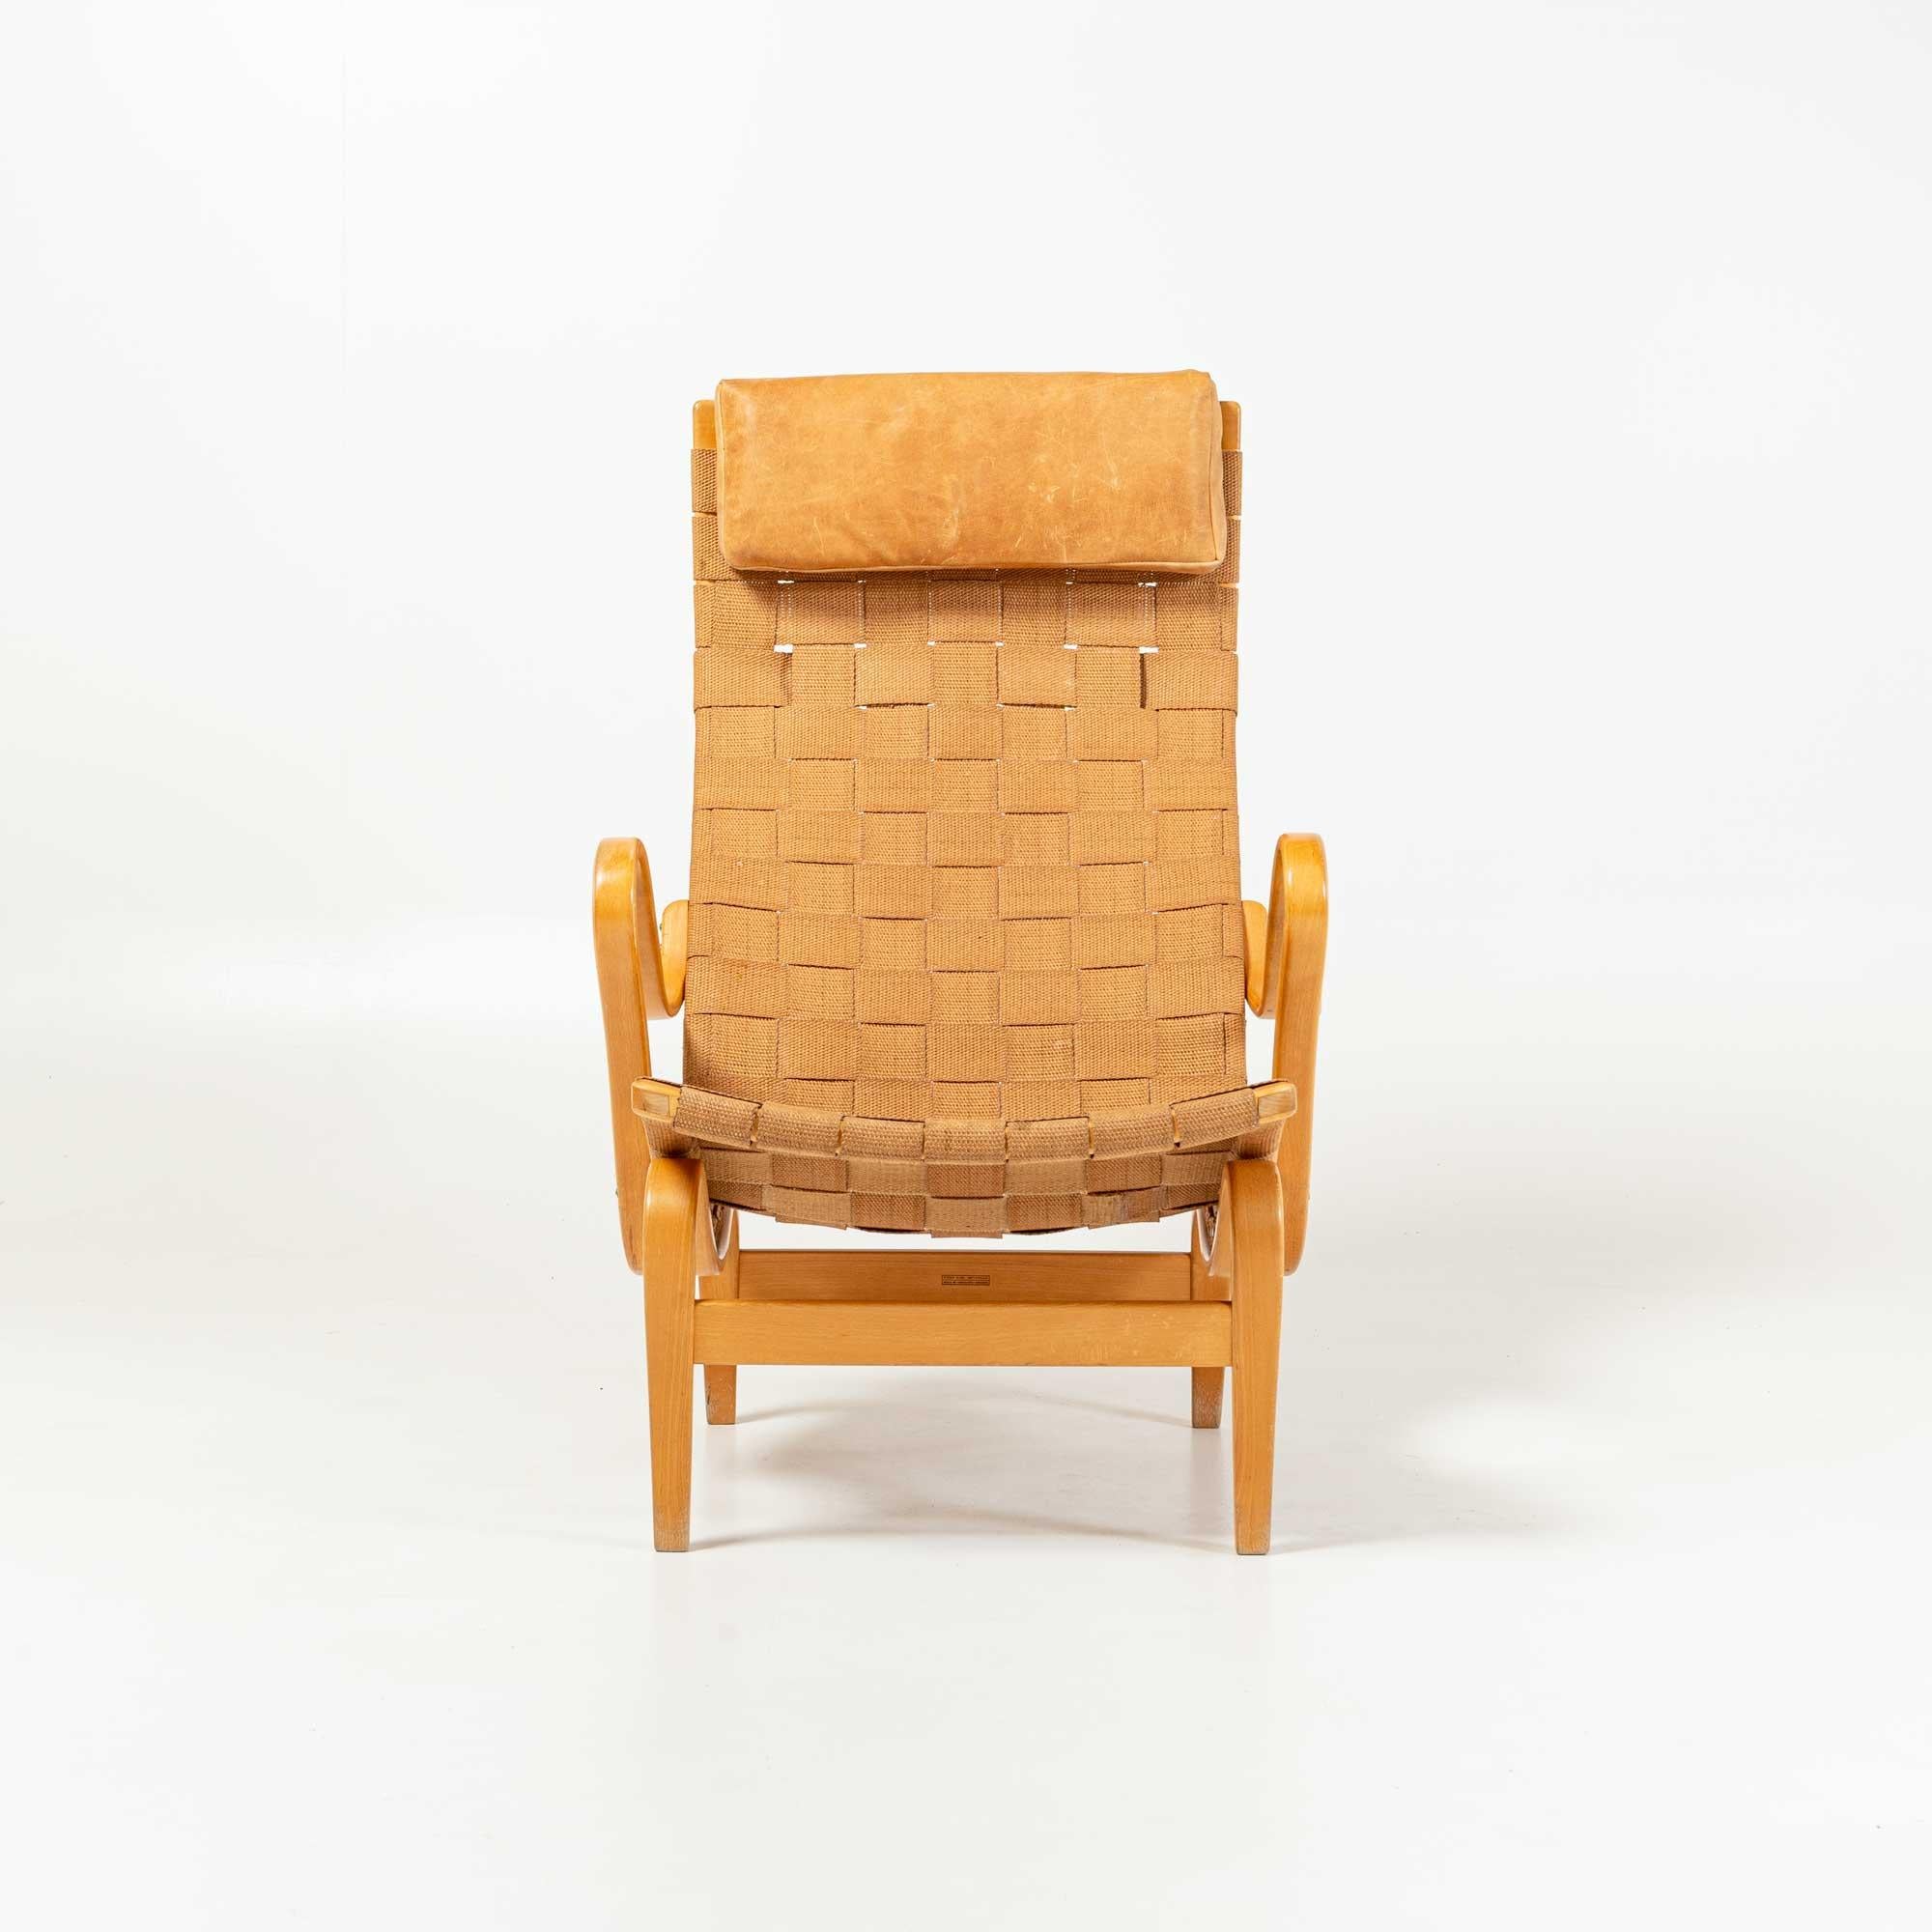 A visionary in his time, Mathsson was along side Aalto and other makers who try to push the boundary of material and design, by leaning into bent wood to express forms and function. This is a well preserved iconic Pernilla high back (1944) chair in